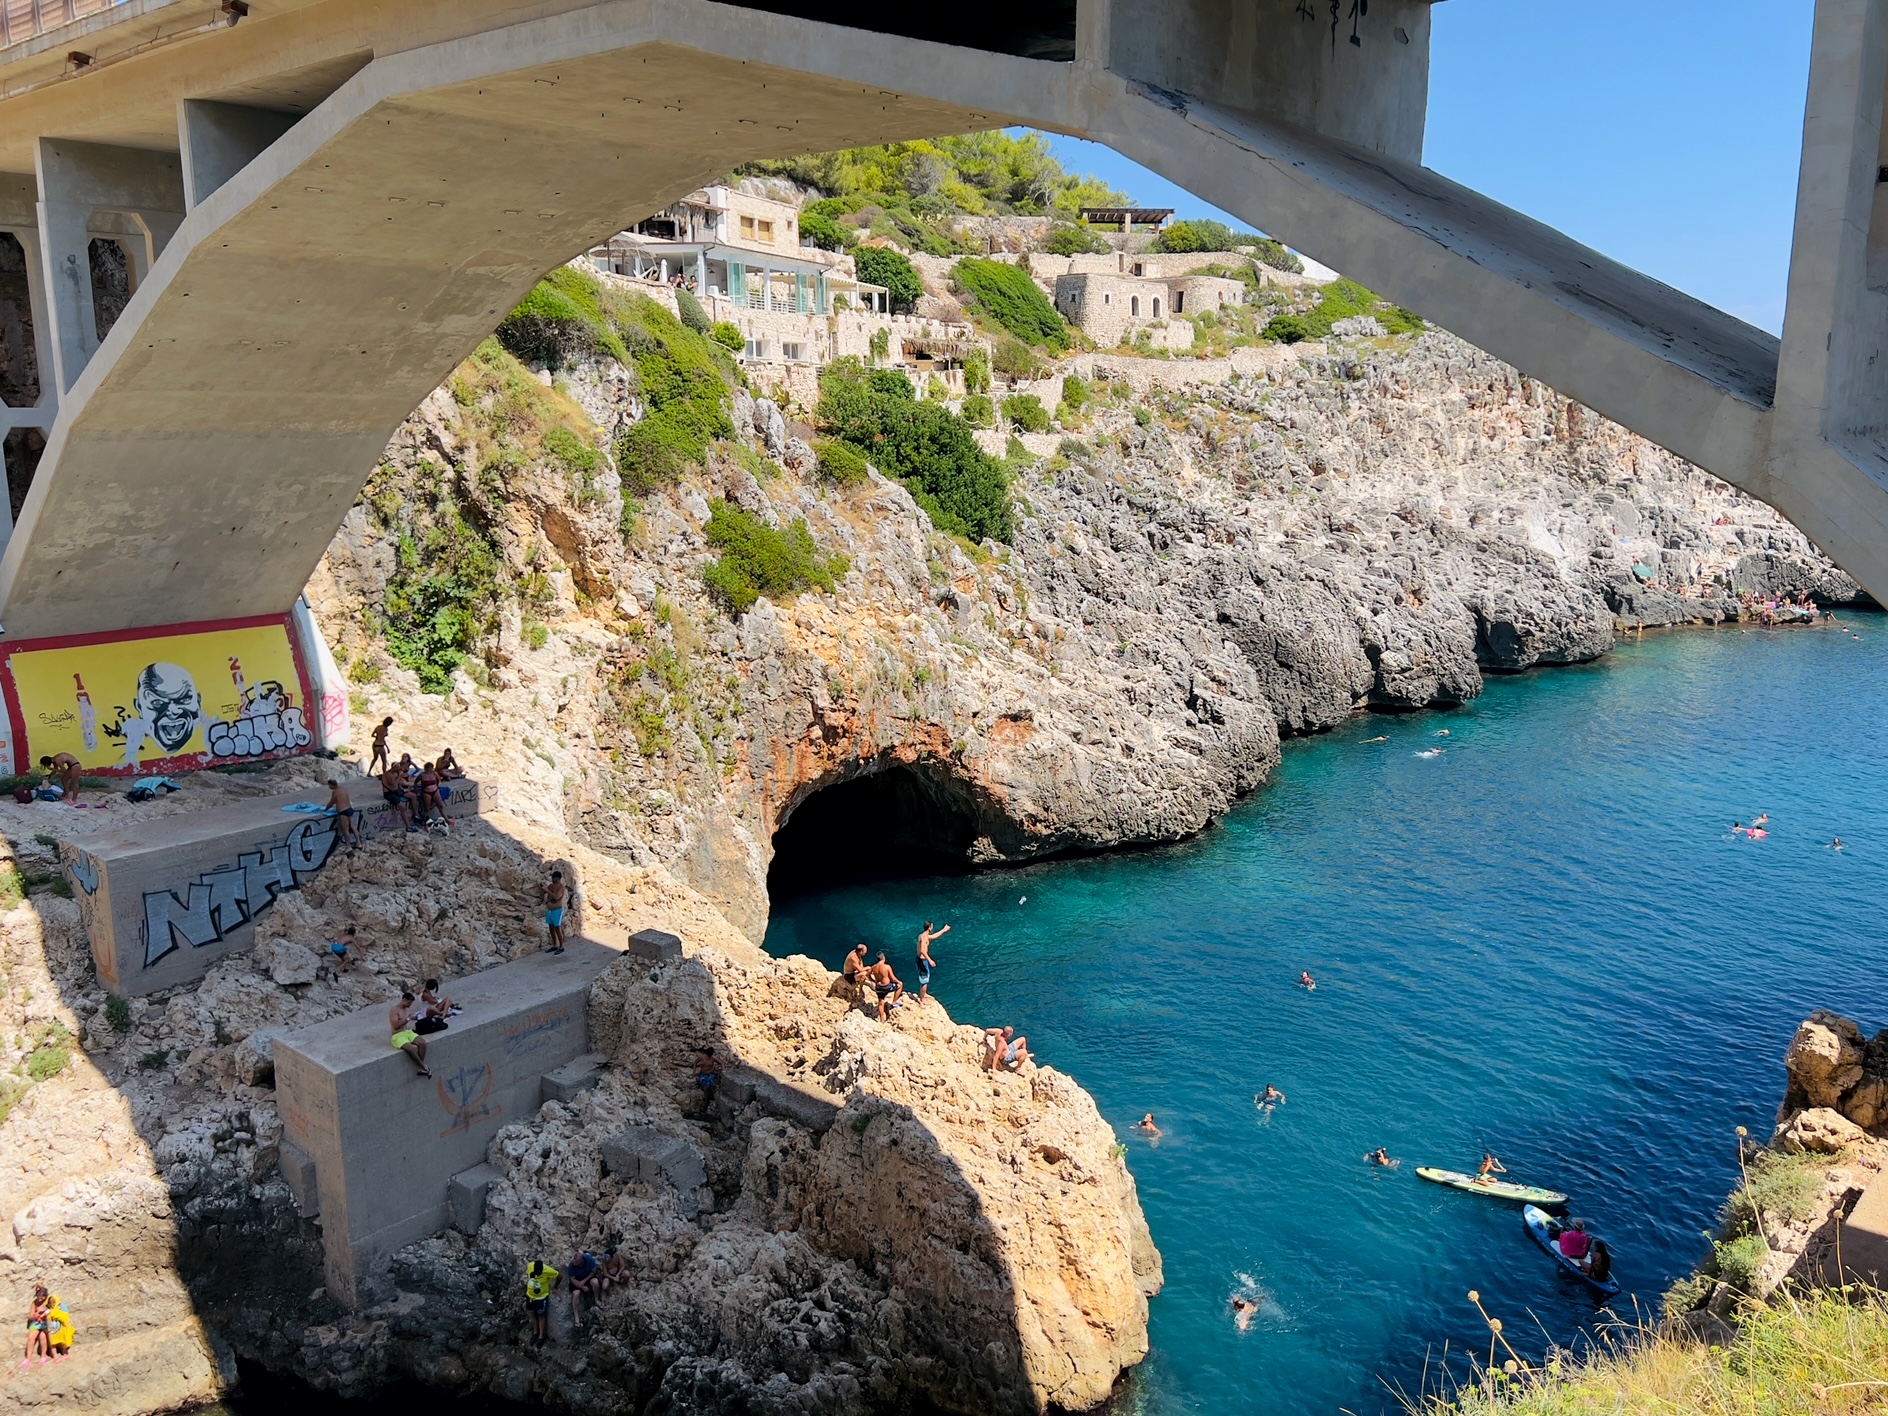 Jumping off the cliff at il Ciolo, Gagliano del Capo - one of Puglia’s most beautiful swimming spots, in a dramatic canyon underneath a bridge | Photo © the Puglia Guys for the Big Gay Podcast from Puglia guides to gay Puglia, Italy’s top gay summer destination